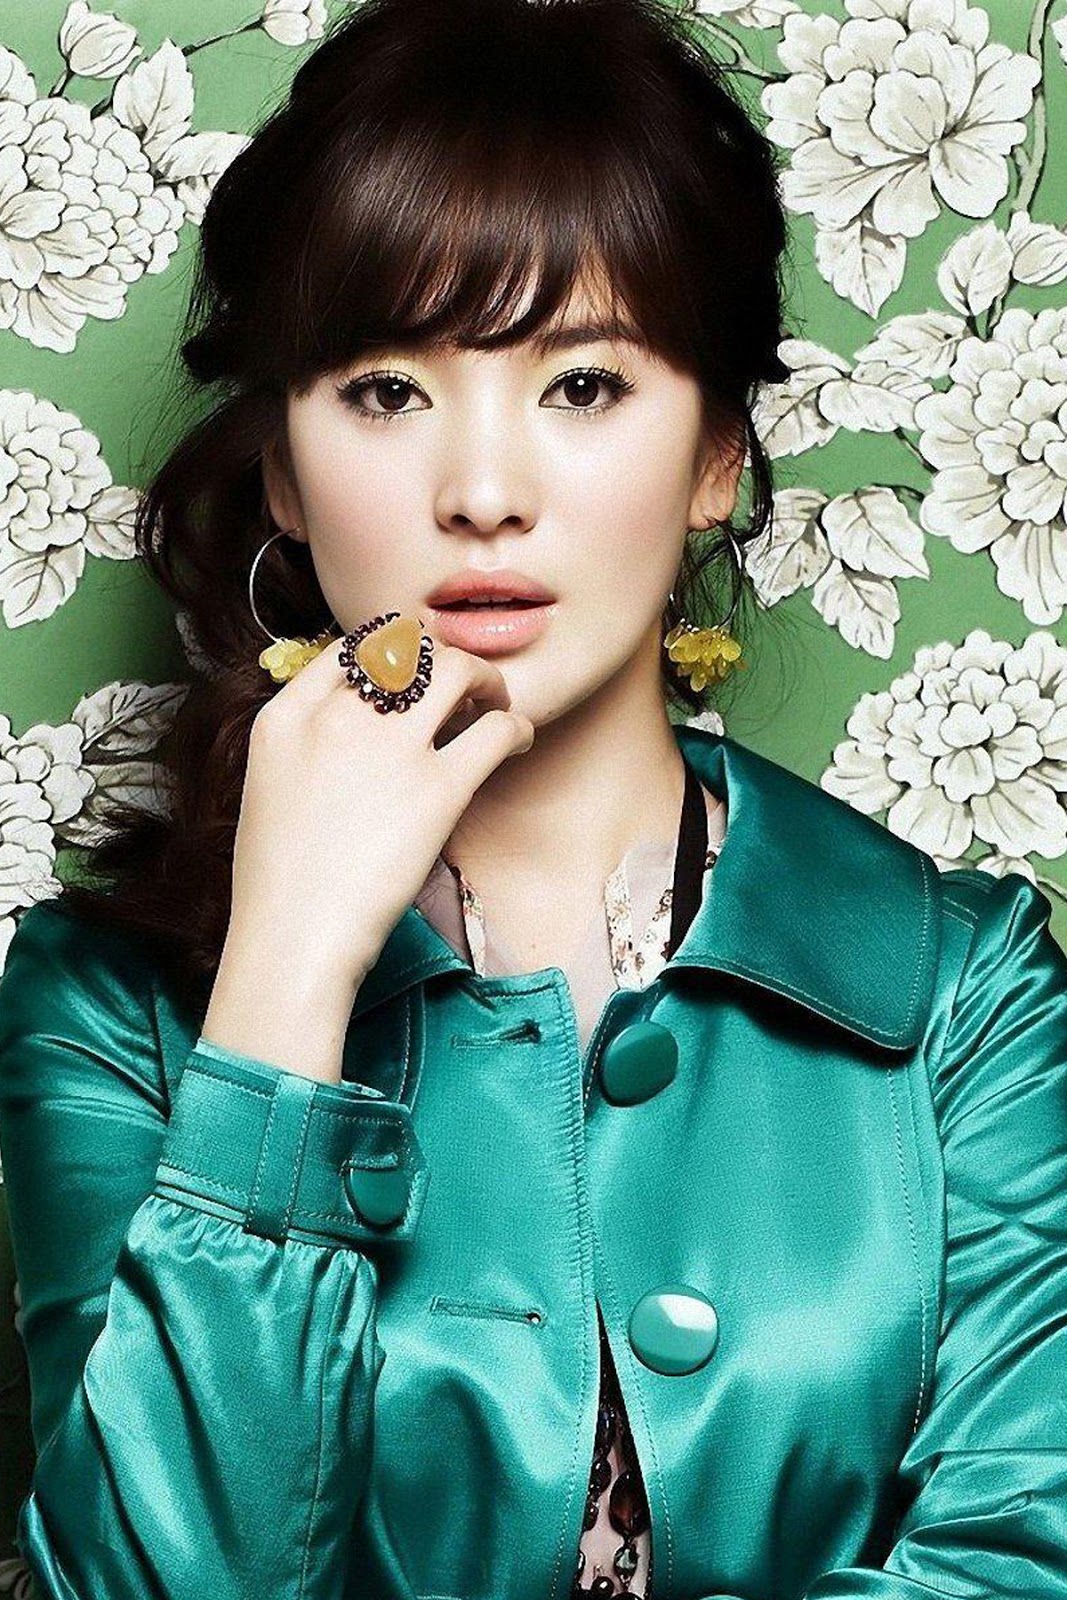 Song Hye Kyo Hd Wallpapers Hd Wallpapers High Definition Free